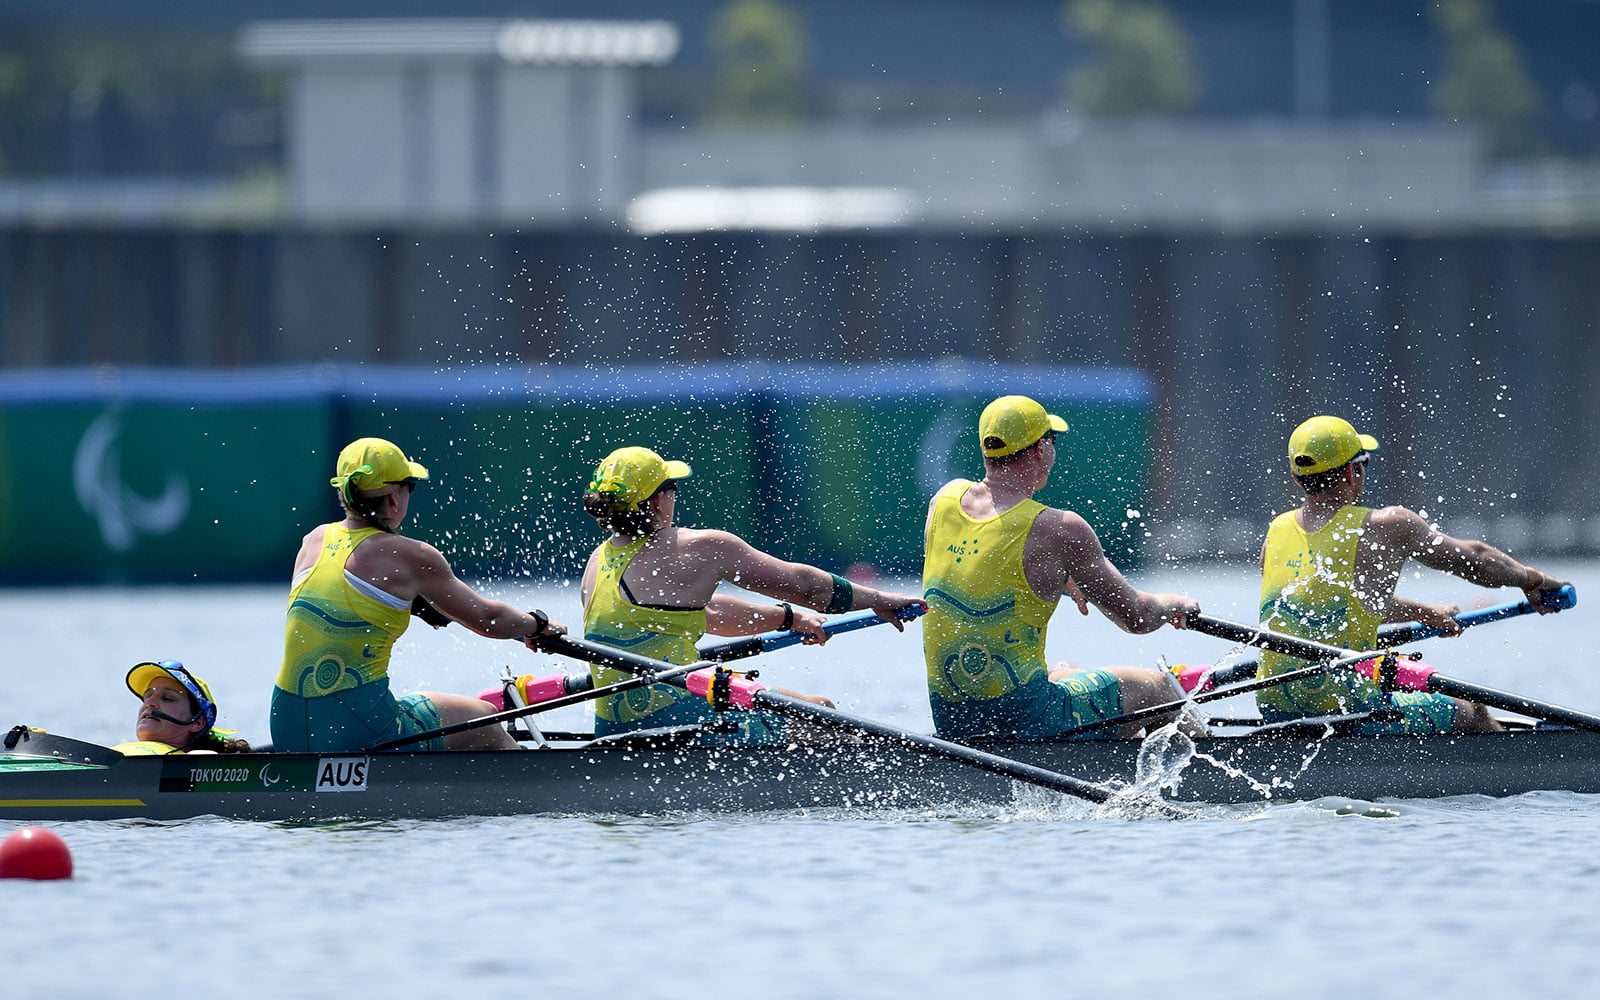 4 rowers in a boat competing on the water